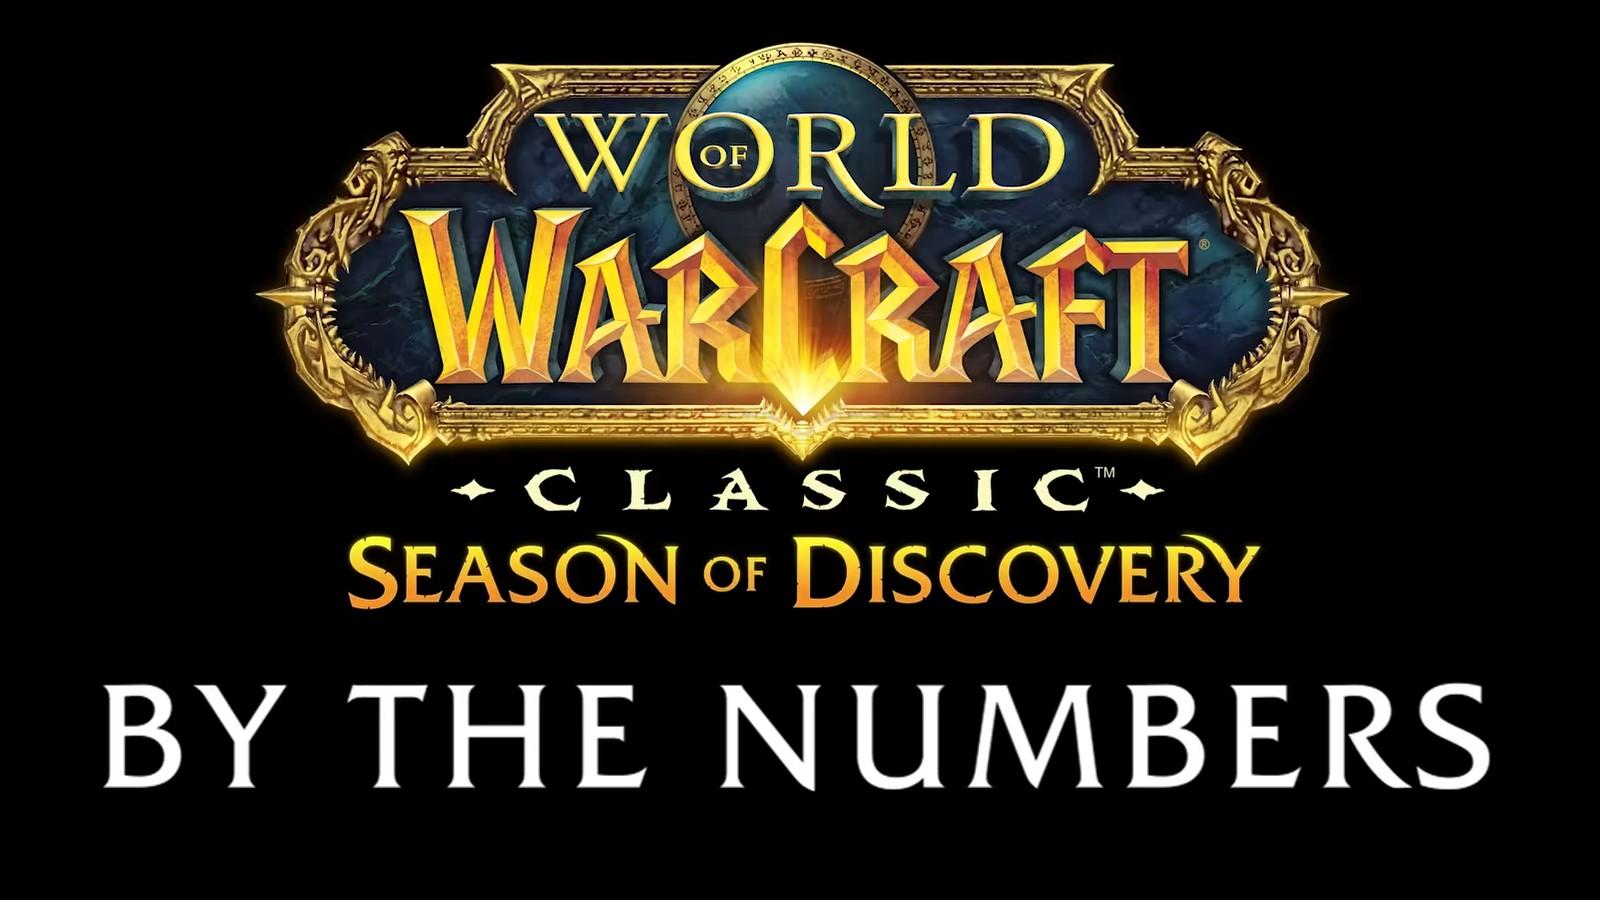 Season of Discovery by the numbers